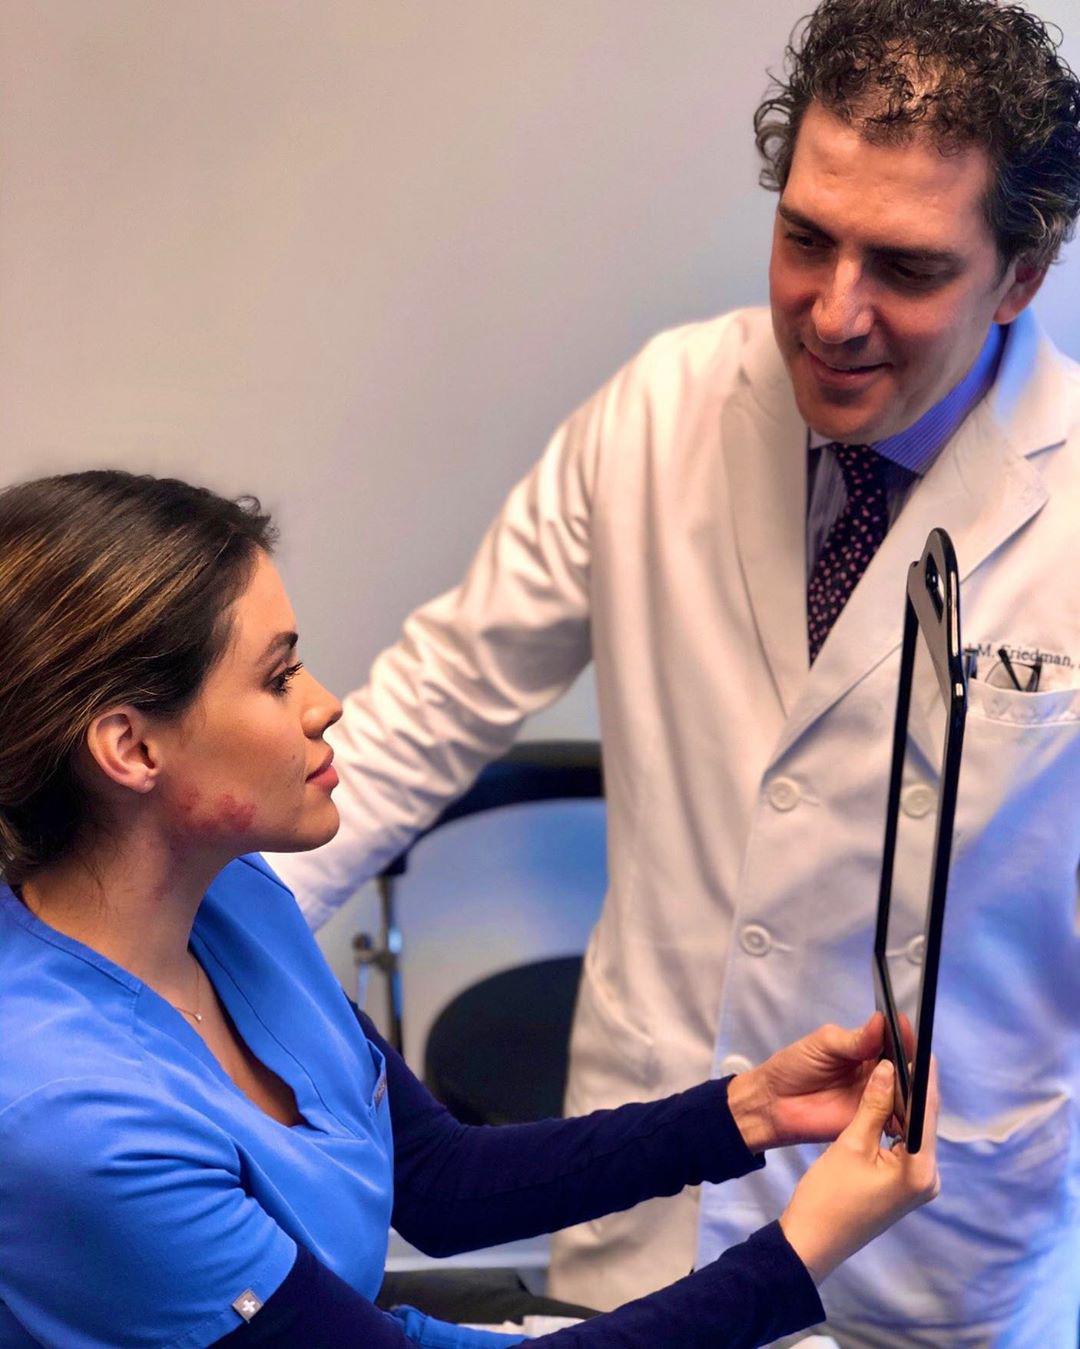 Dr. Friedman performs an initial consultation on a prospective patient.